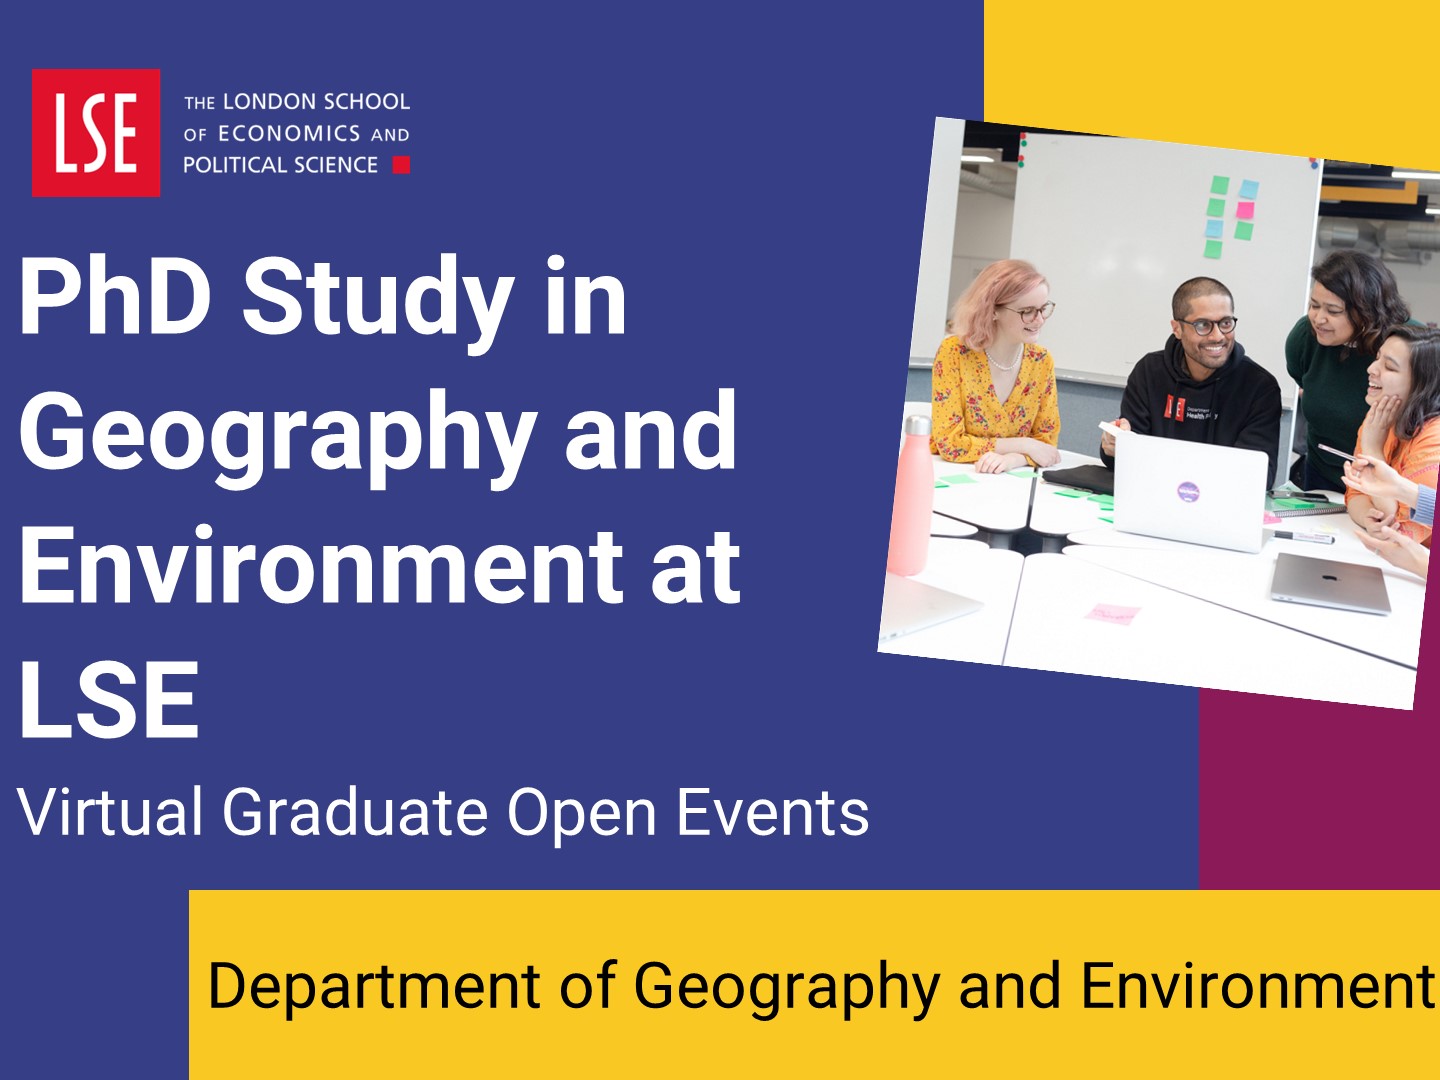 Introduction to PhD study in Geography and Environment at LSE